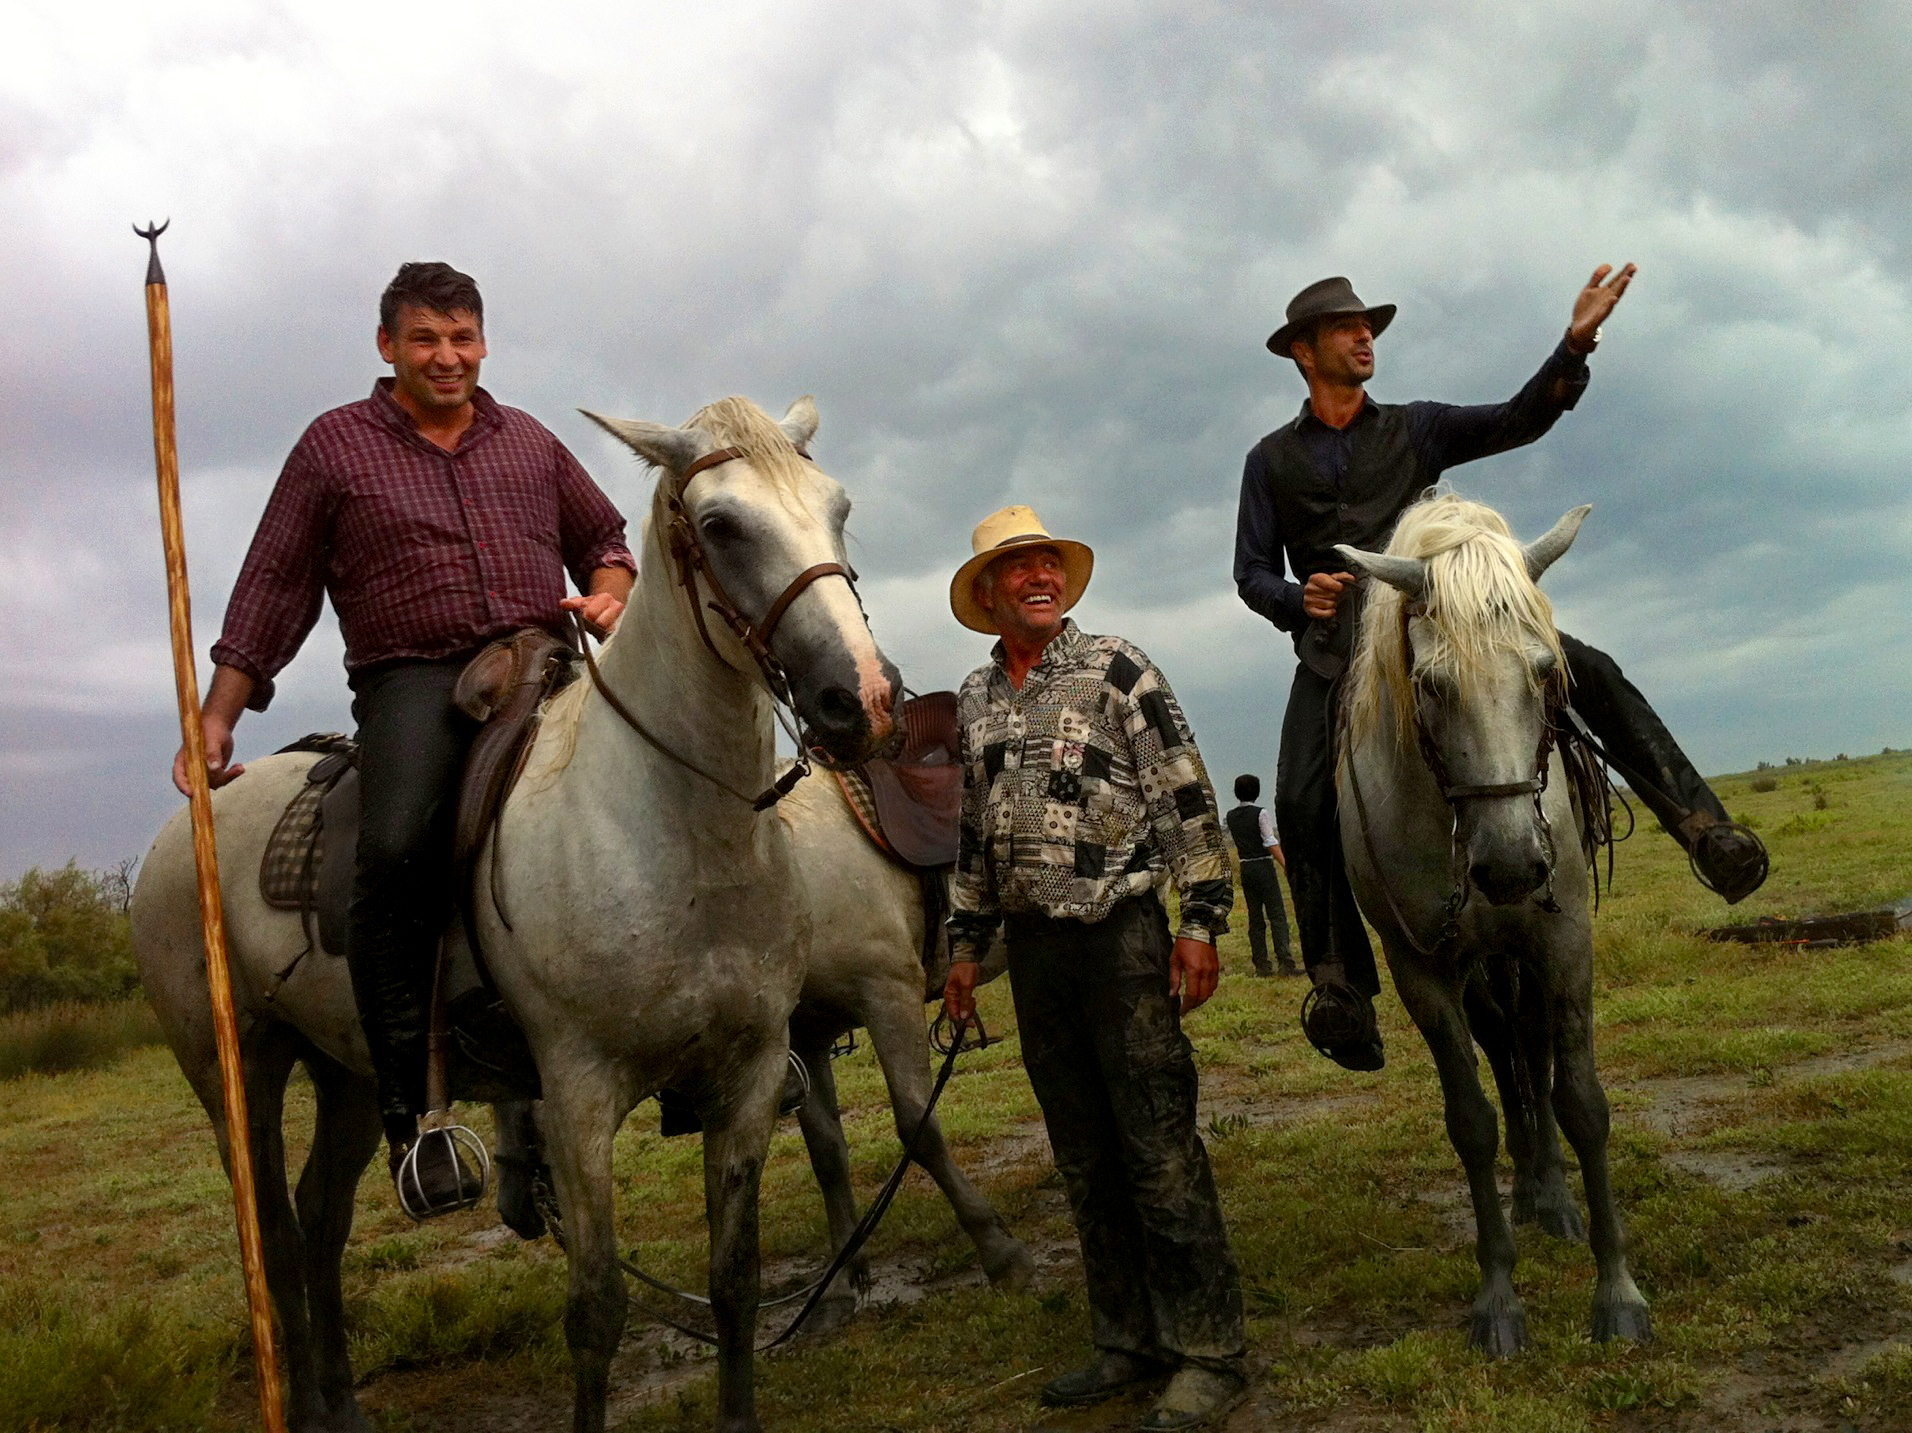 Gardiens, or cowboys, Renaud Vinuesa (on horseback, left) and Olivier Terroux (on horseback, right) are out in the Camargue region of southern France for a branding, or la ferrade, with their tridents.